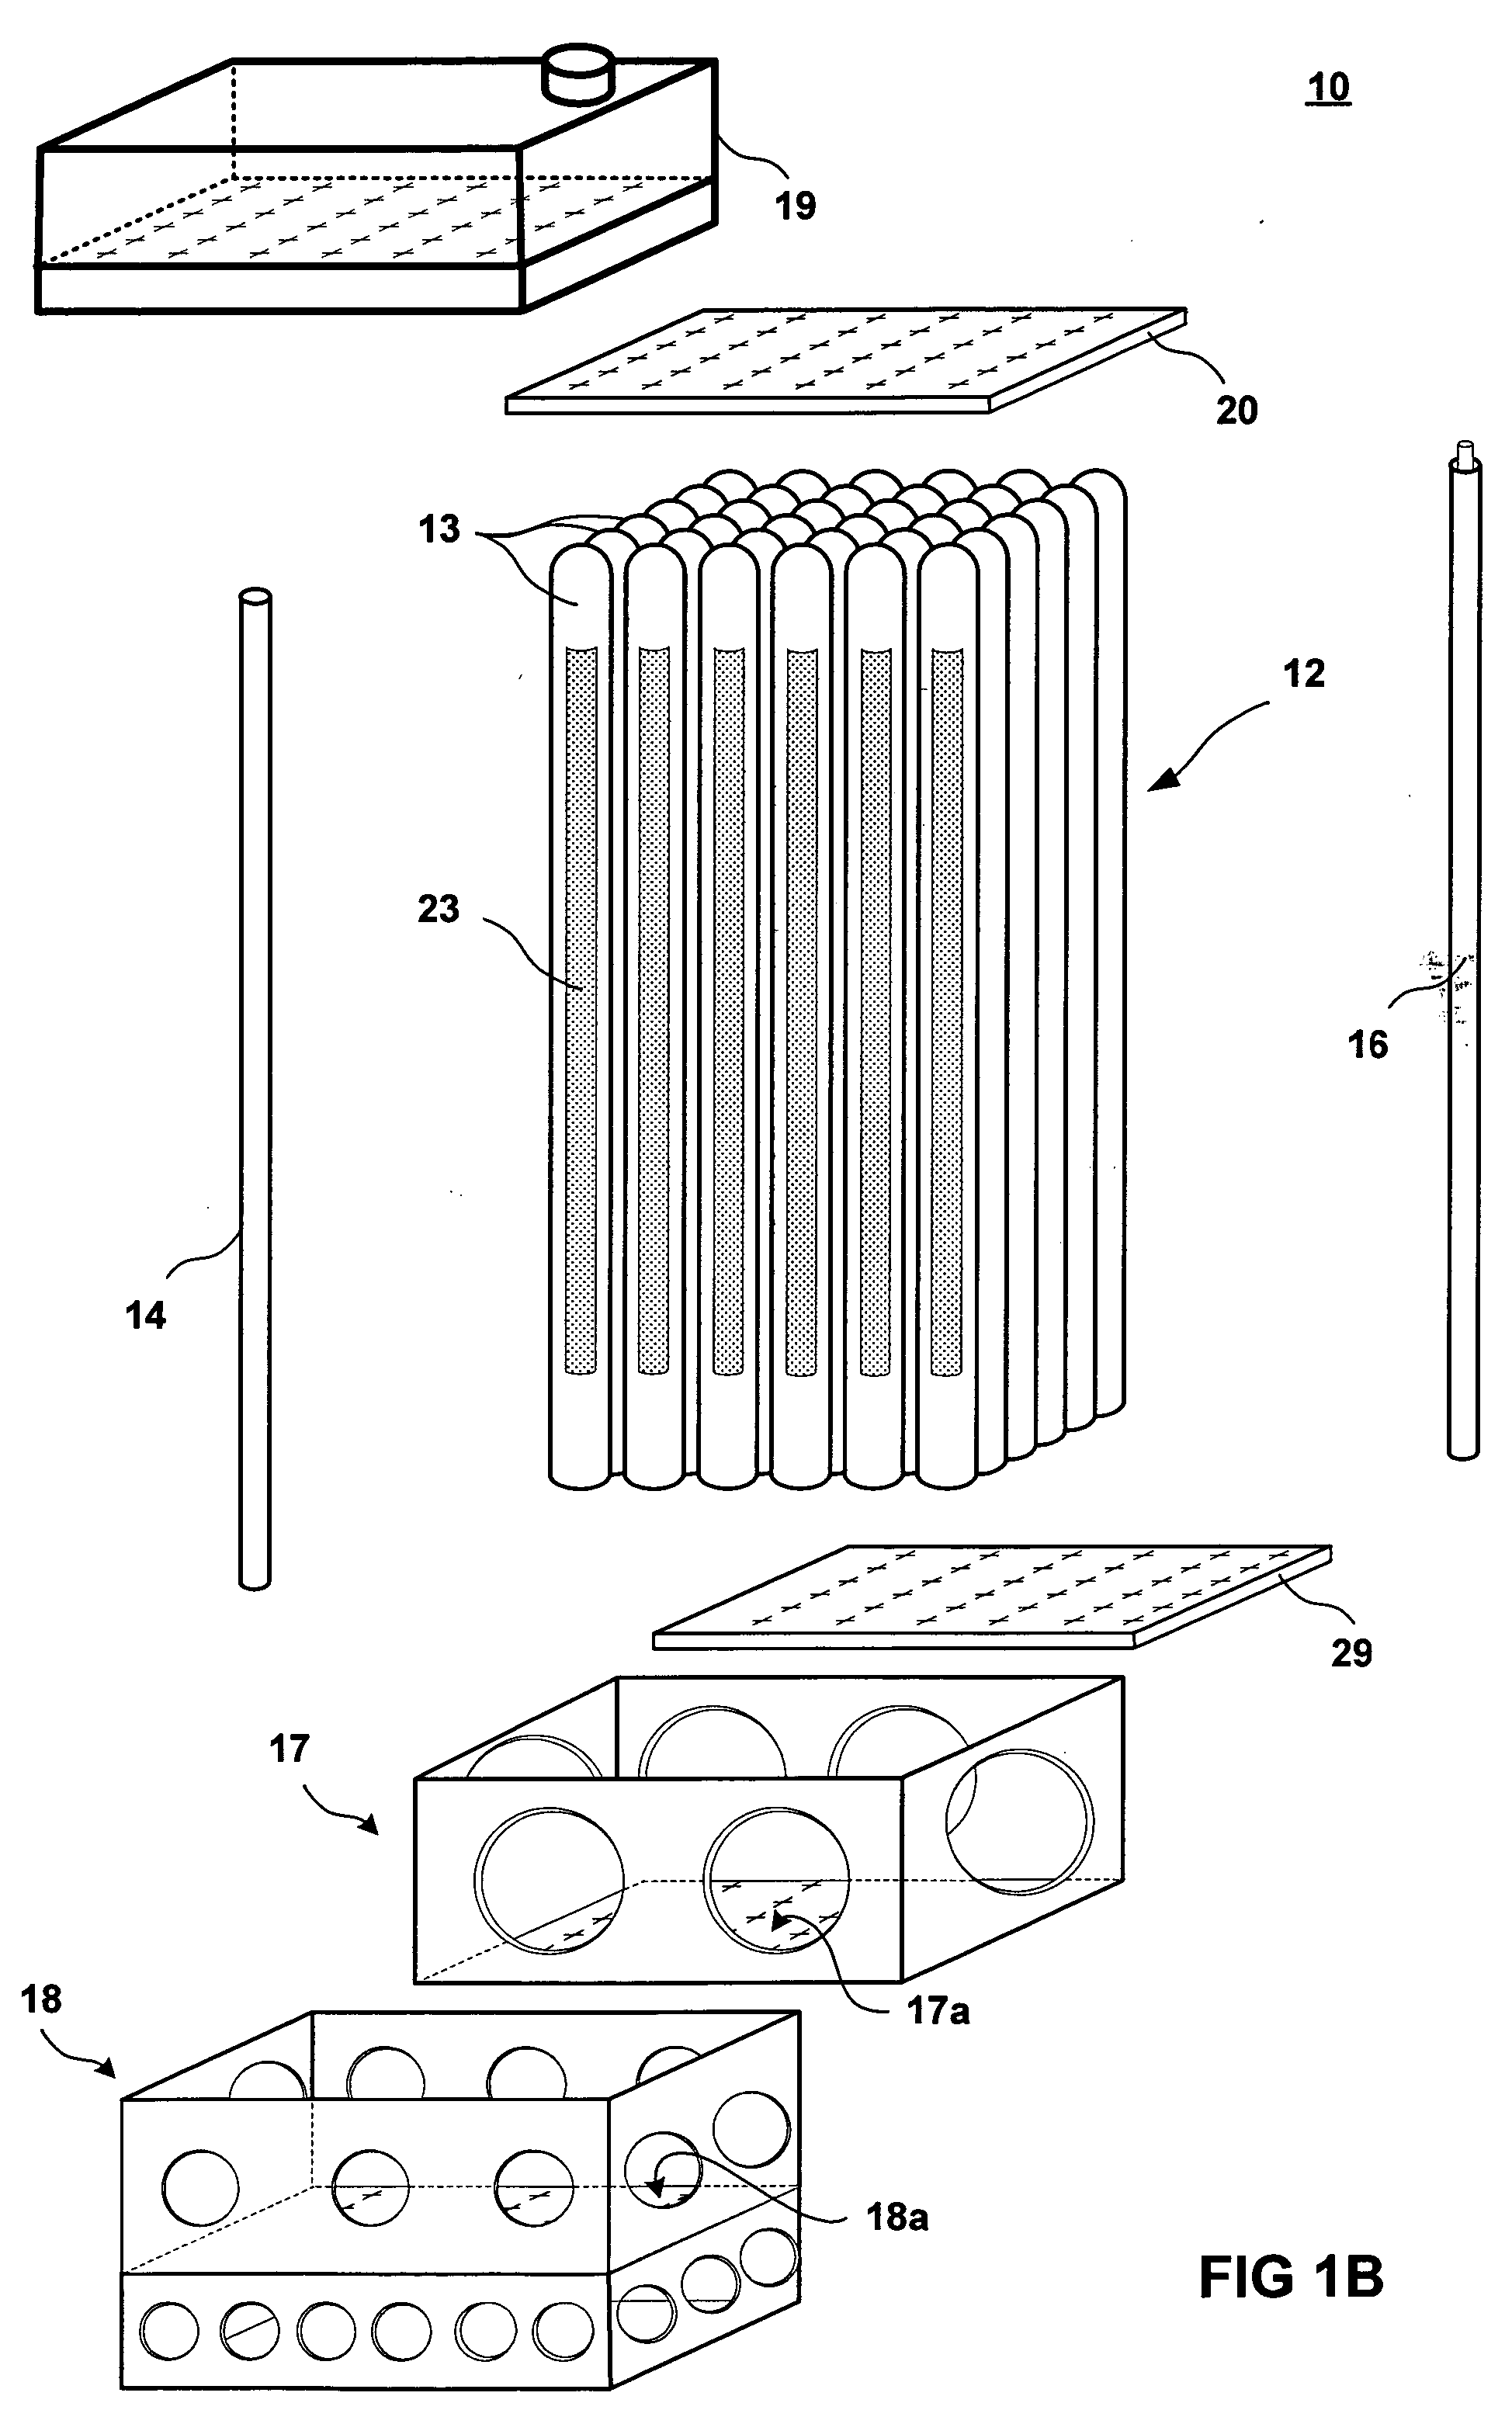 Multi-function solid oxide fuel cell bundle and method of making the same